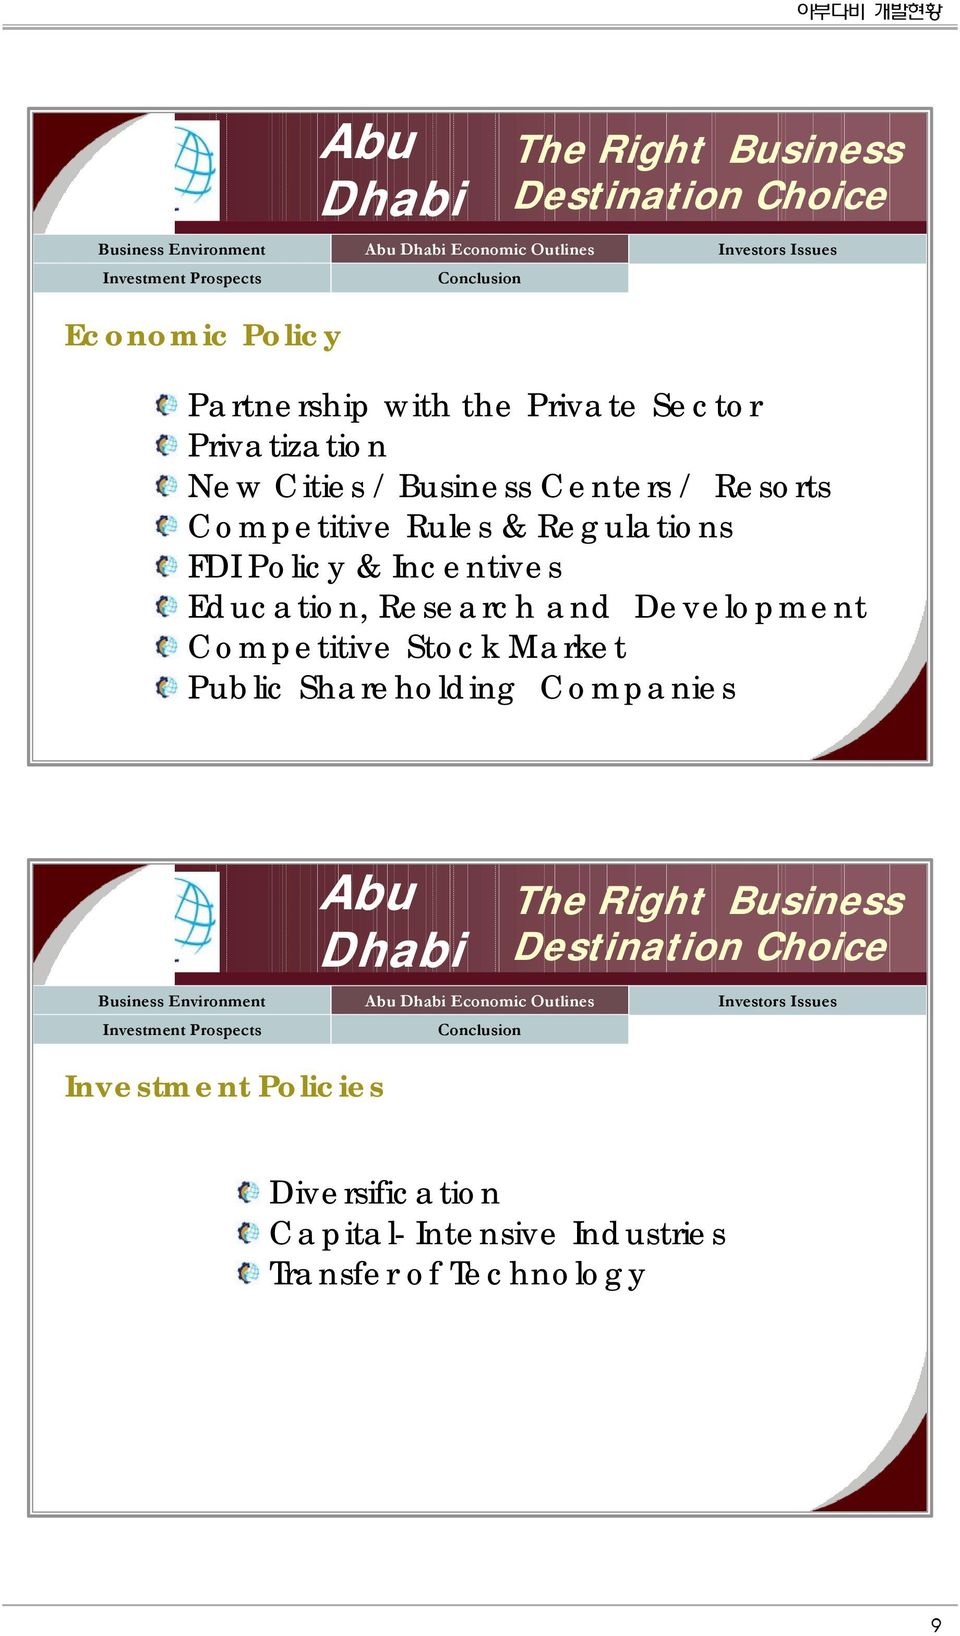 Incentives Education, Research and Development Competitive Stock Market Public Shareholding Companies Business Environment Abu Dhabi Economic Outlines Investors